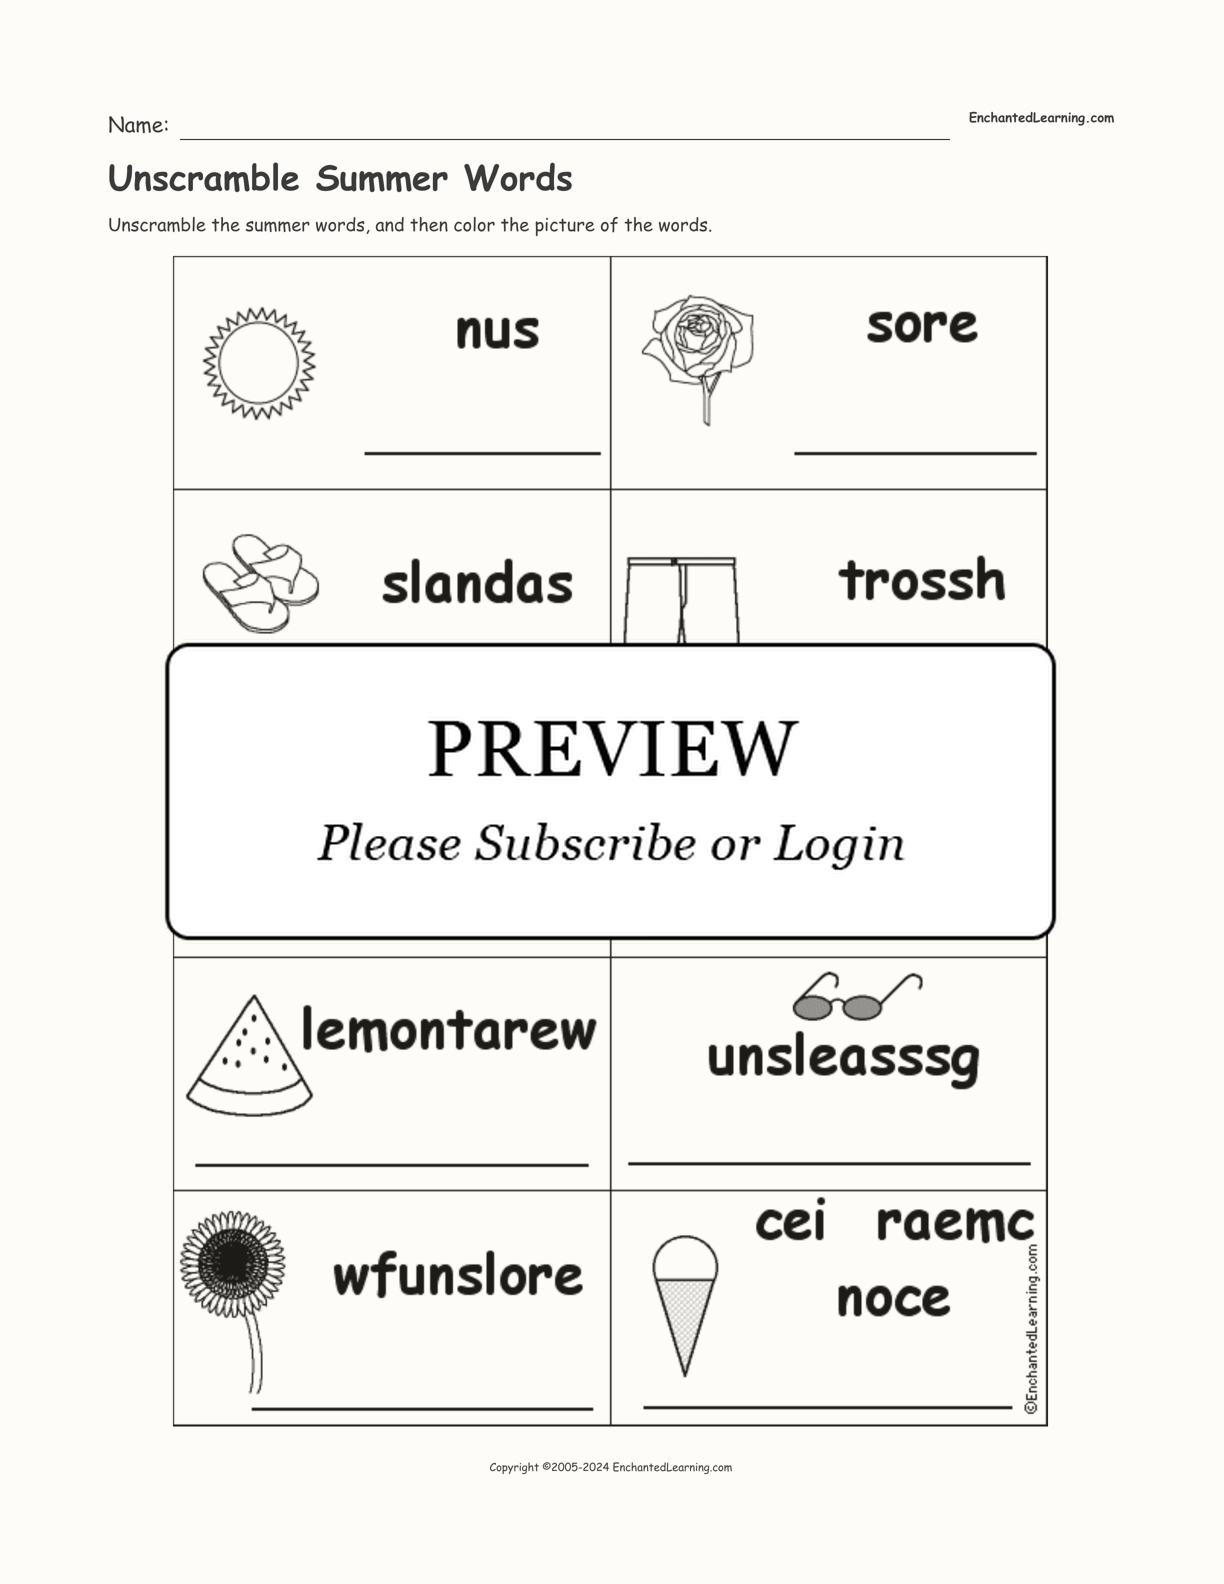 Unscramble Summer Words interactive worksheet page 1